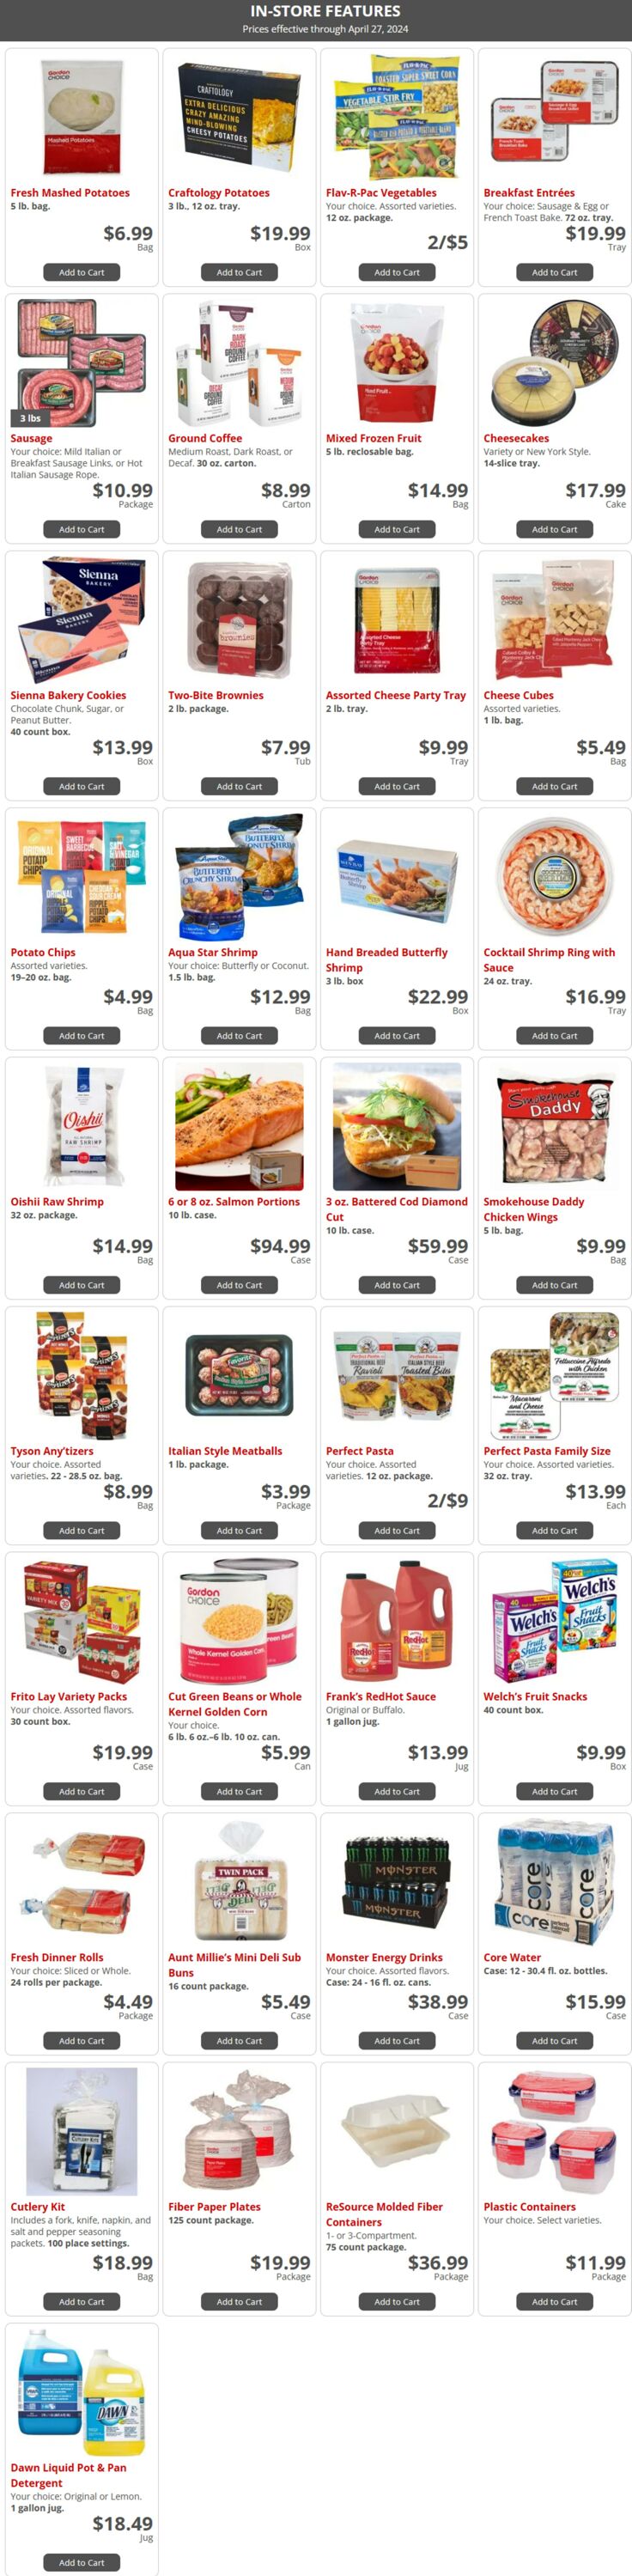 Gordon Food Service Store Promotional weekly ads